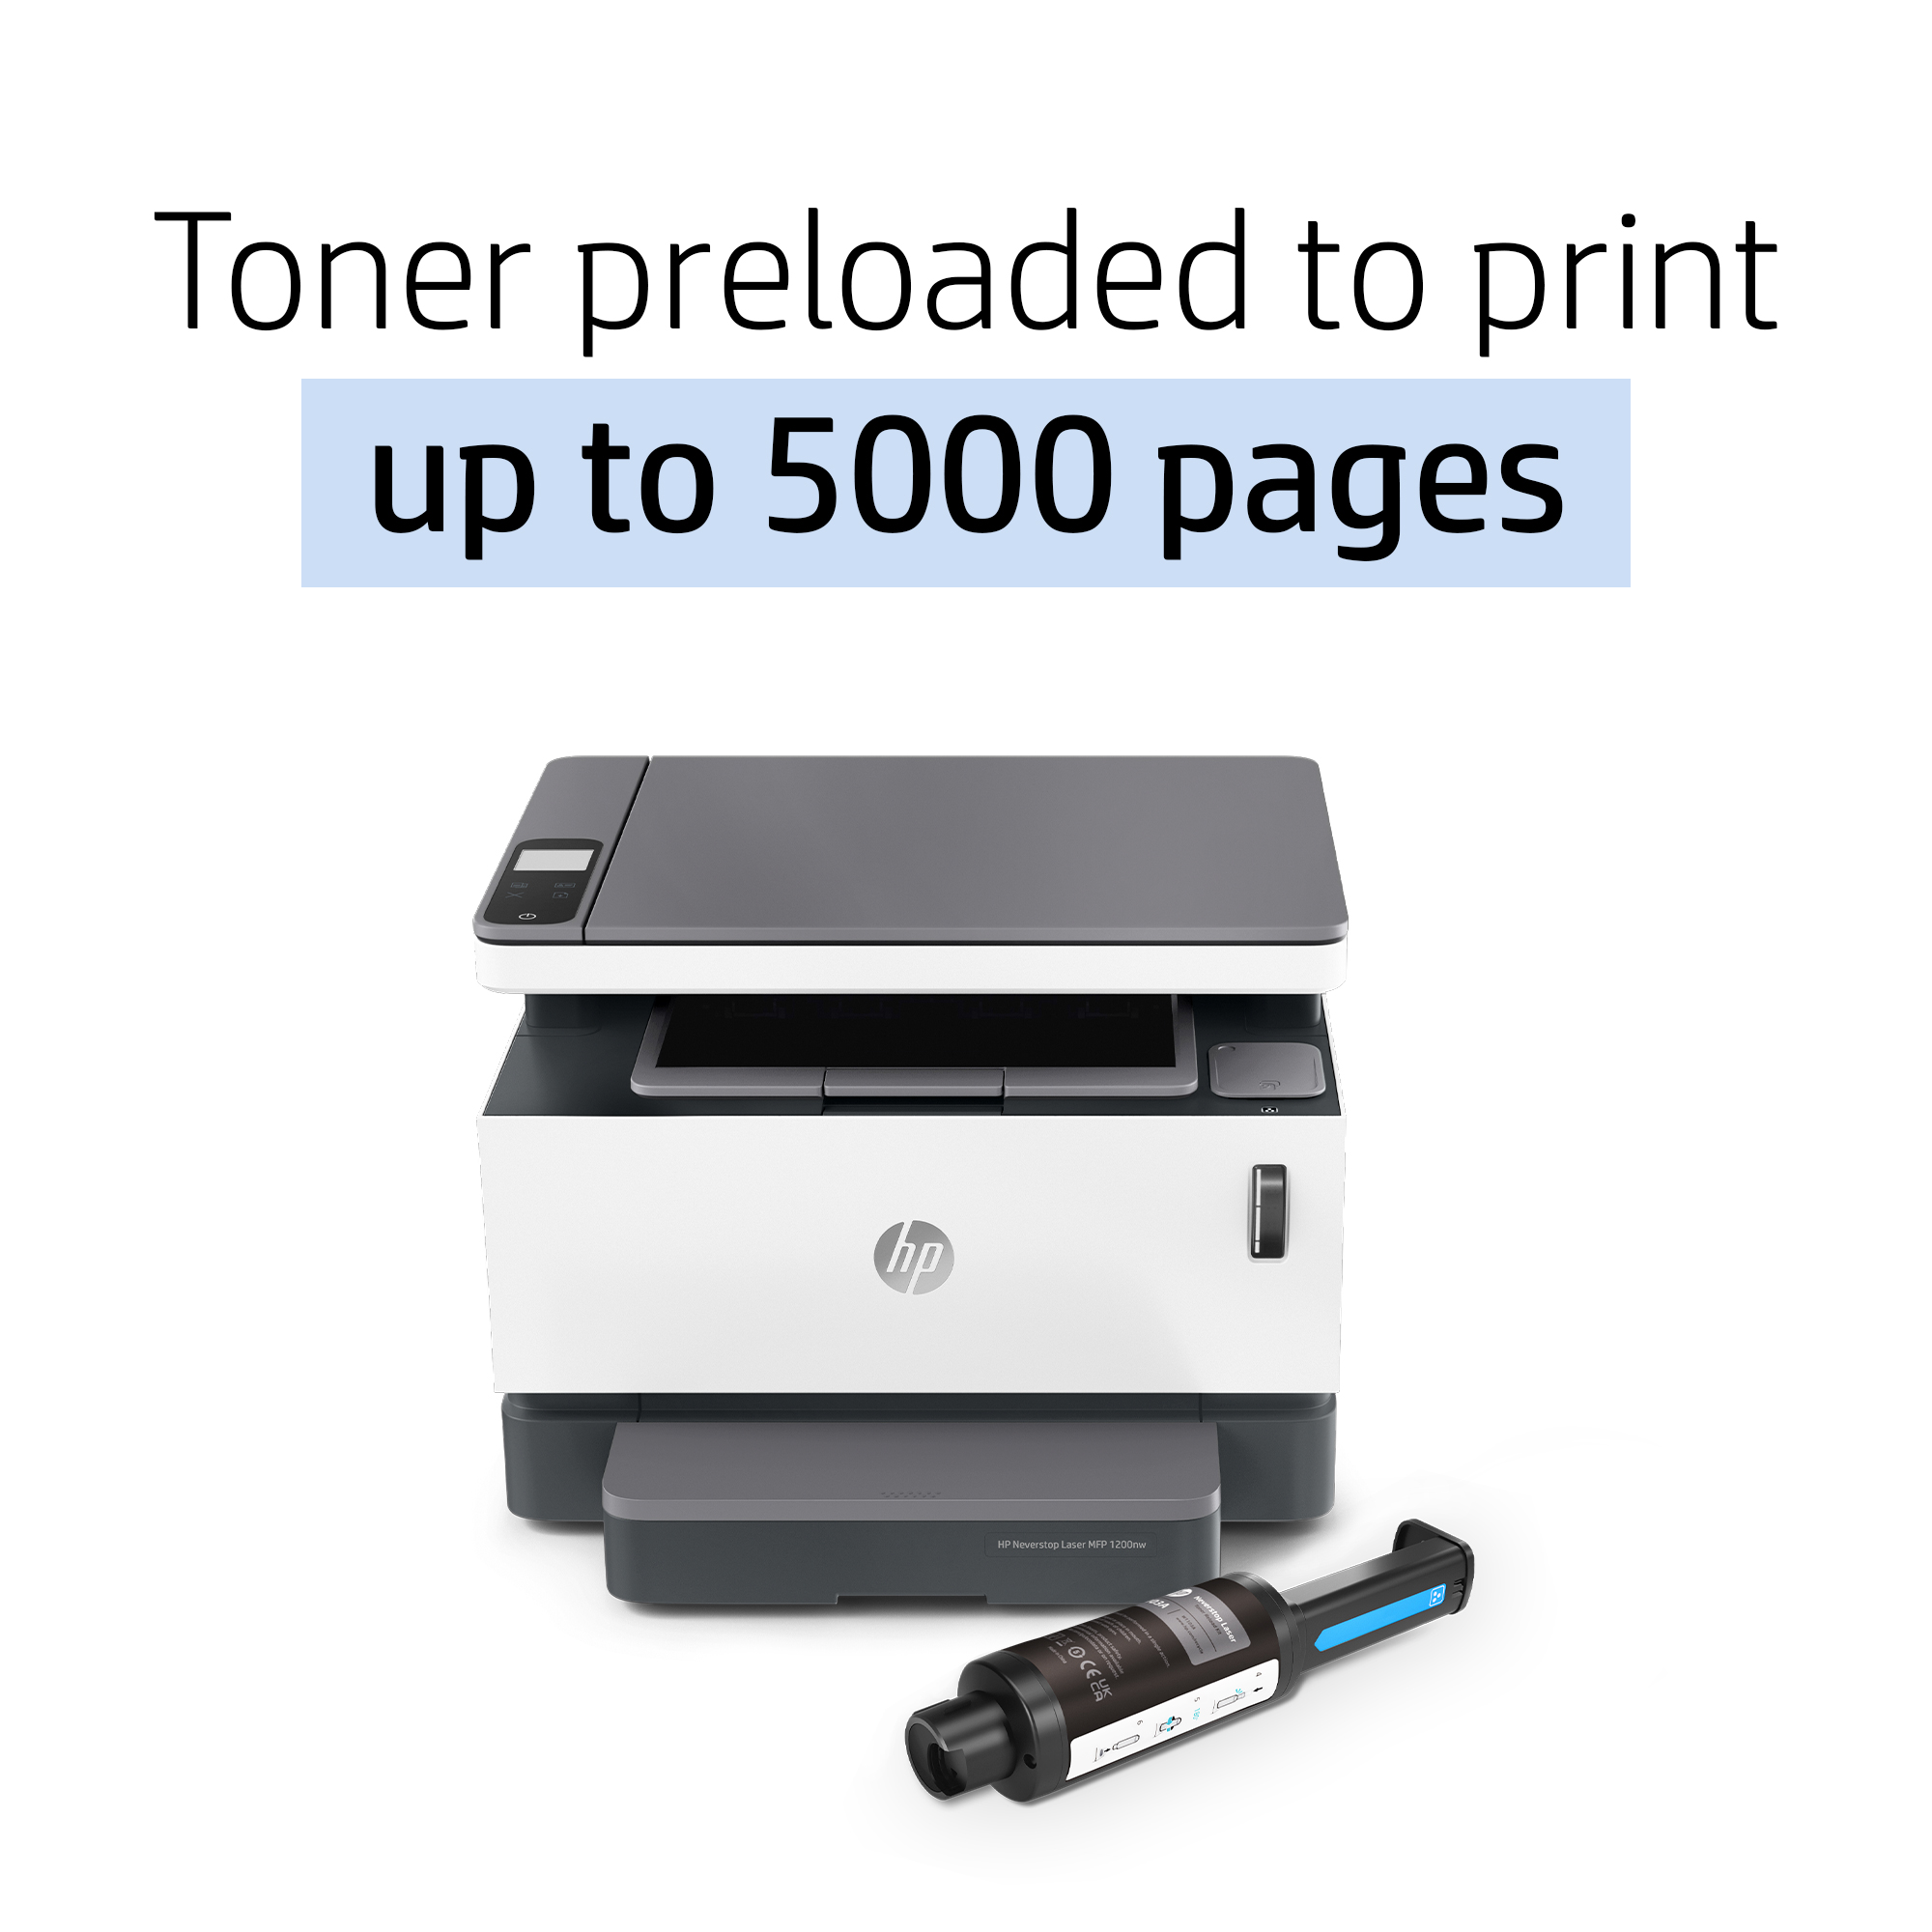 verontschuldigen ledematen voorspelling Buy online Best price of HP Neverstop Laser 1200W Wireless, Print, Scan,  Copy, Automated Document Feeder, Mono Printer, Toner preloaded to print up  to 5000 pages – White [4RY26A] in Egypt 2020 | Sharafdg.com